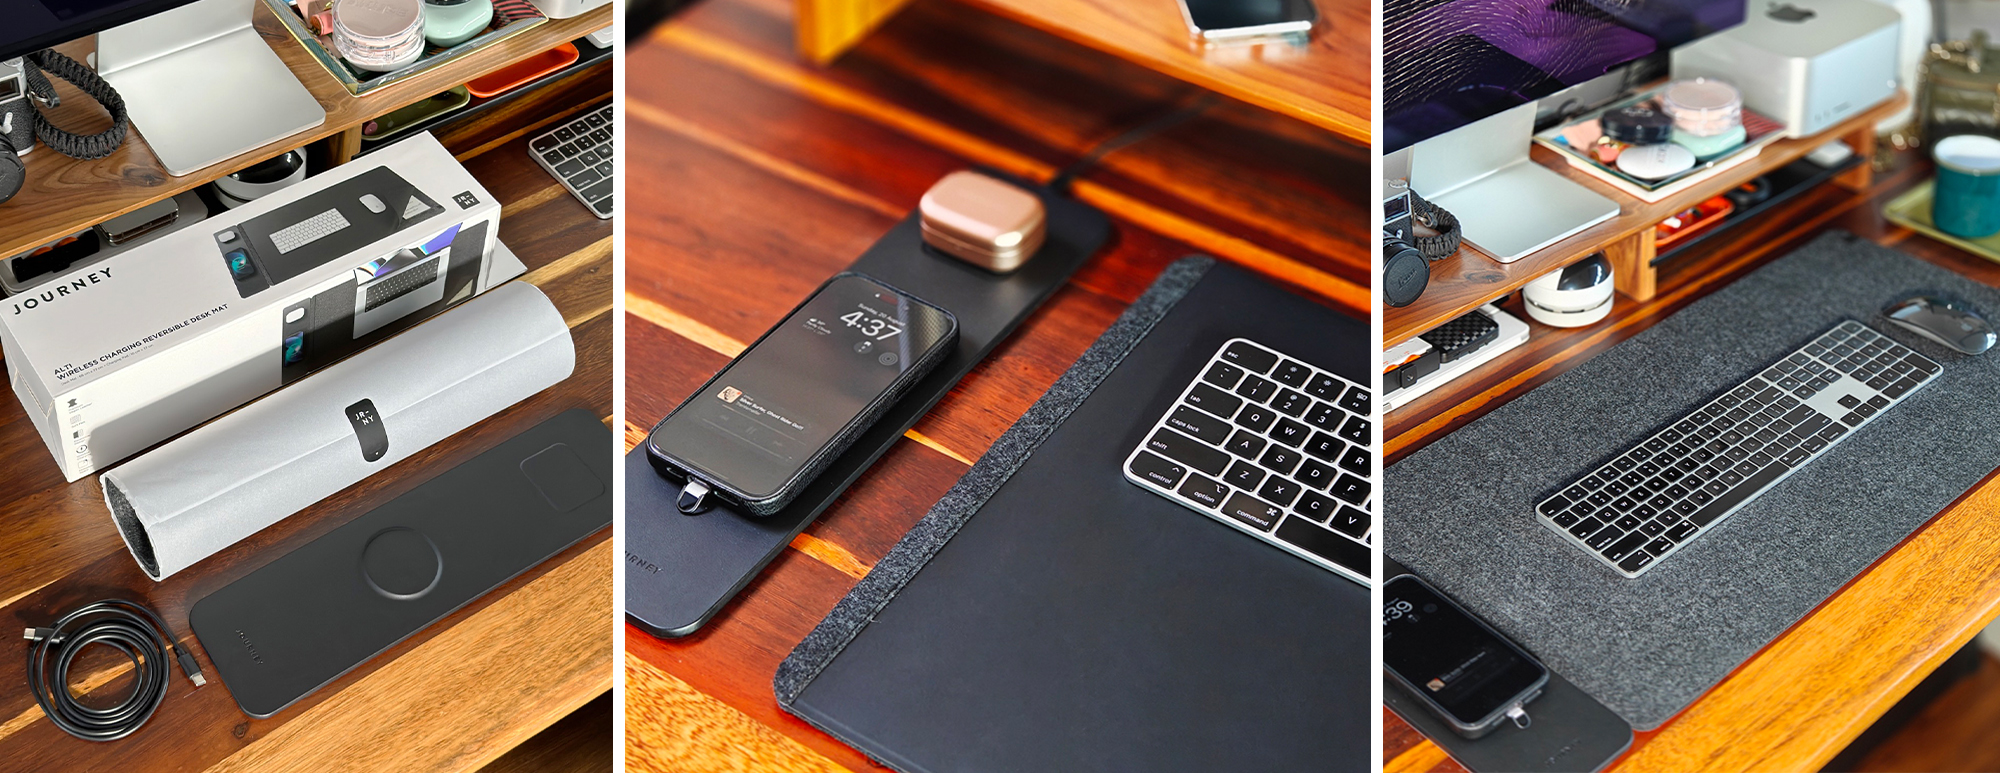 Review: ALTI Wireless Charging Desk Mat, a desk upgrade you never